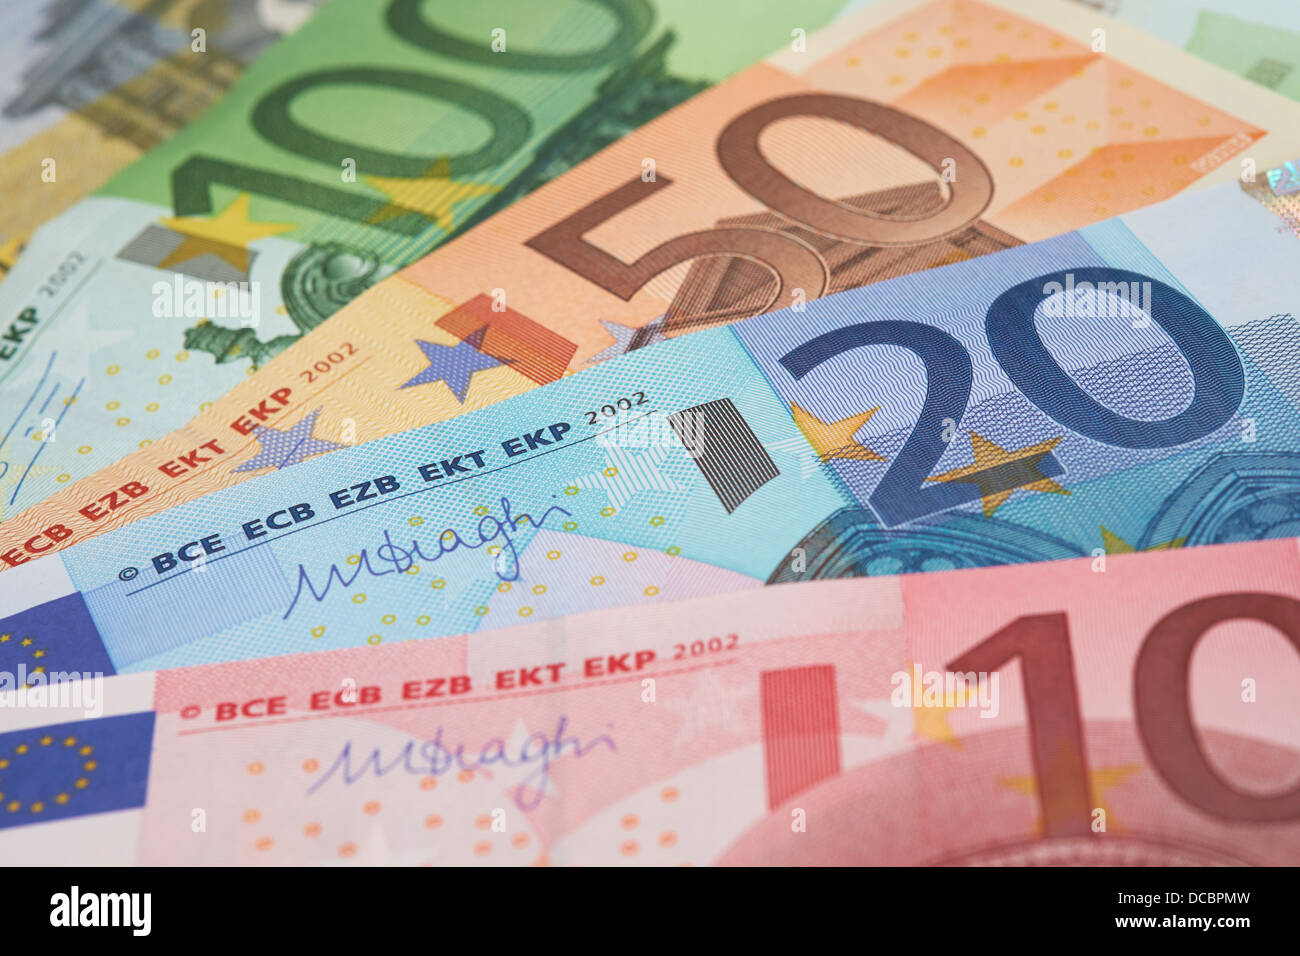 European Bank notes, Euro currency from Europe, Euros. Stock Photo